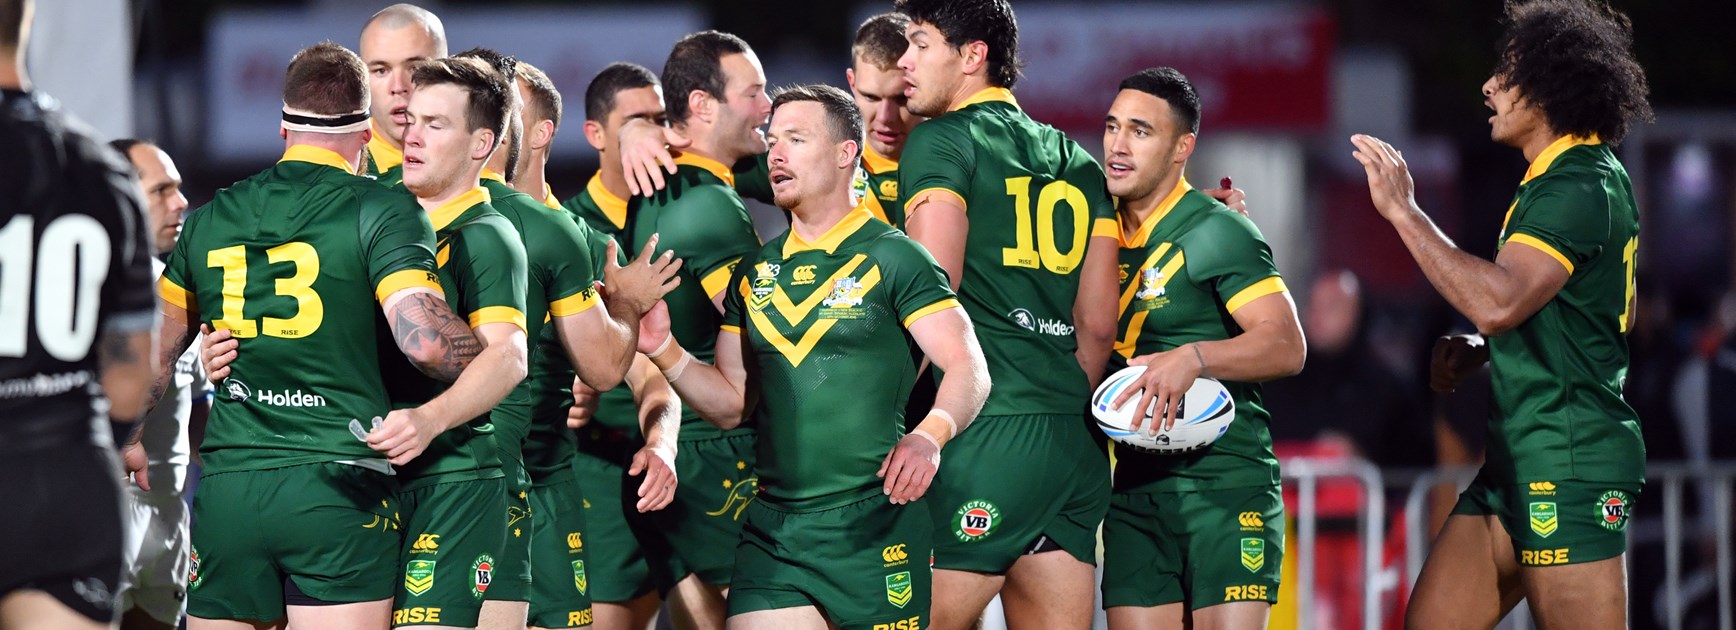 The Kangaroos celebrate a try.